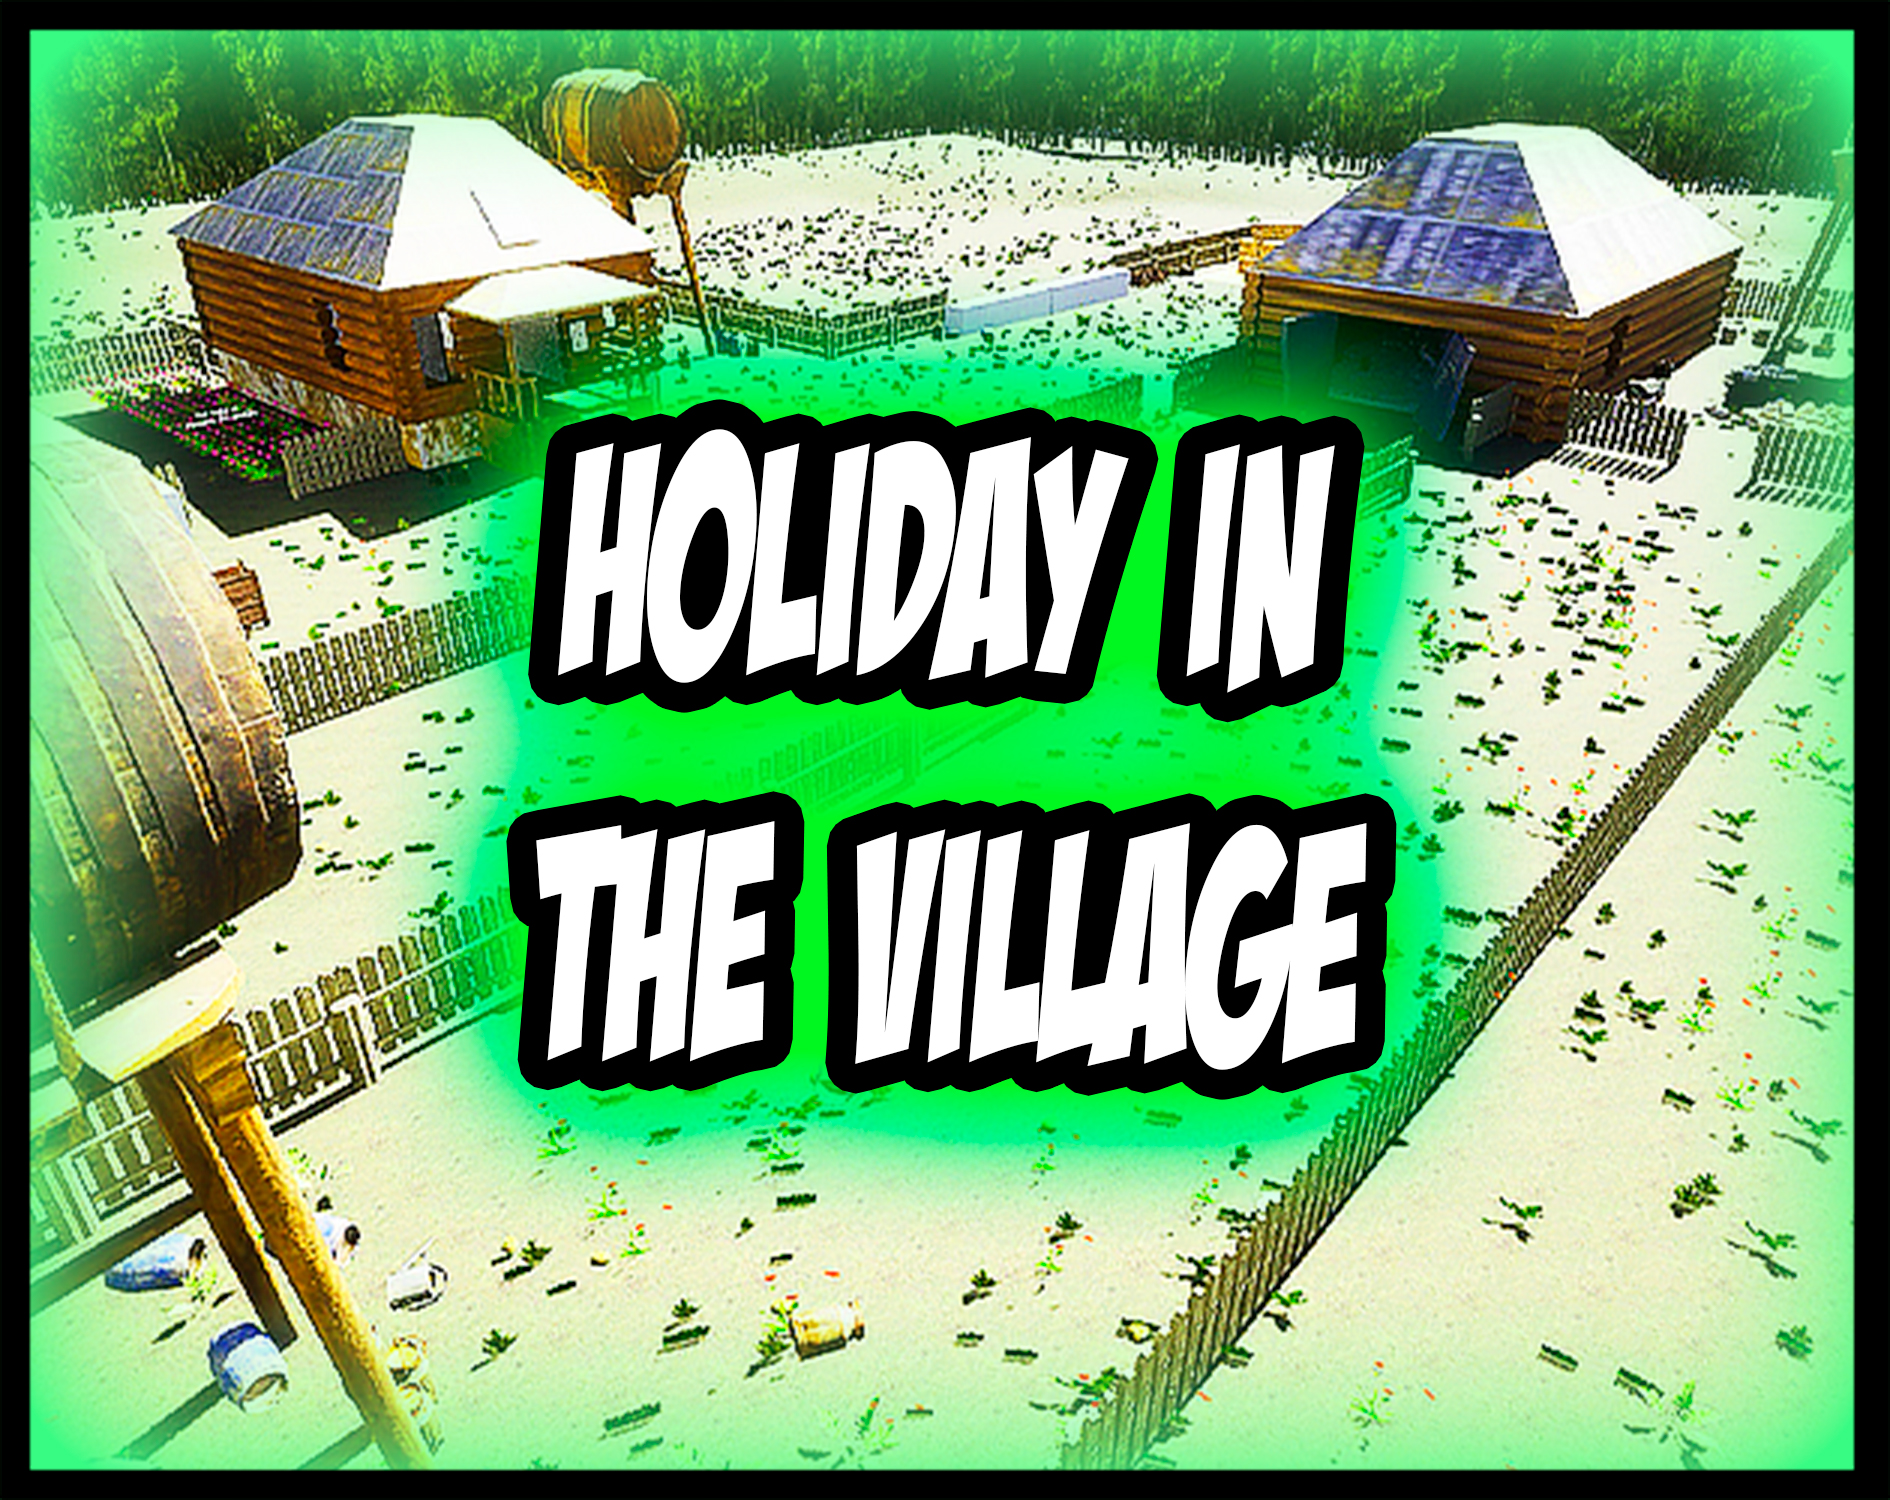 Holiday in the village.